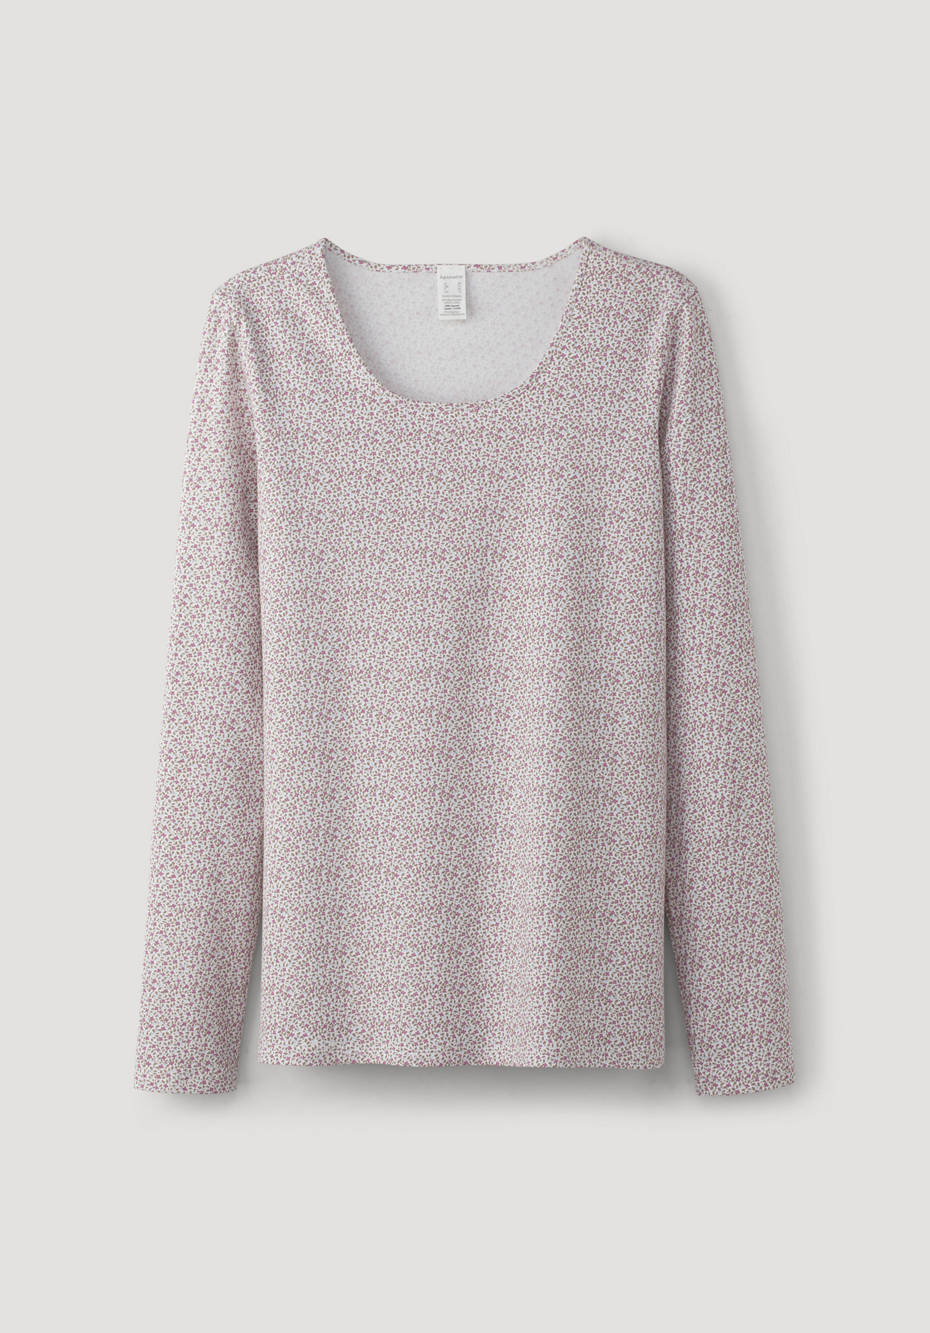 PurLux long-sleeved shirt made of organic cotton